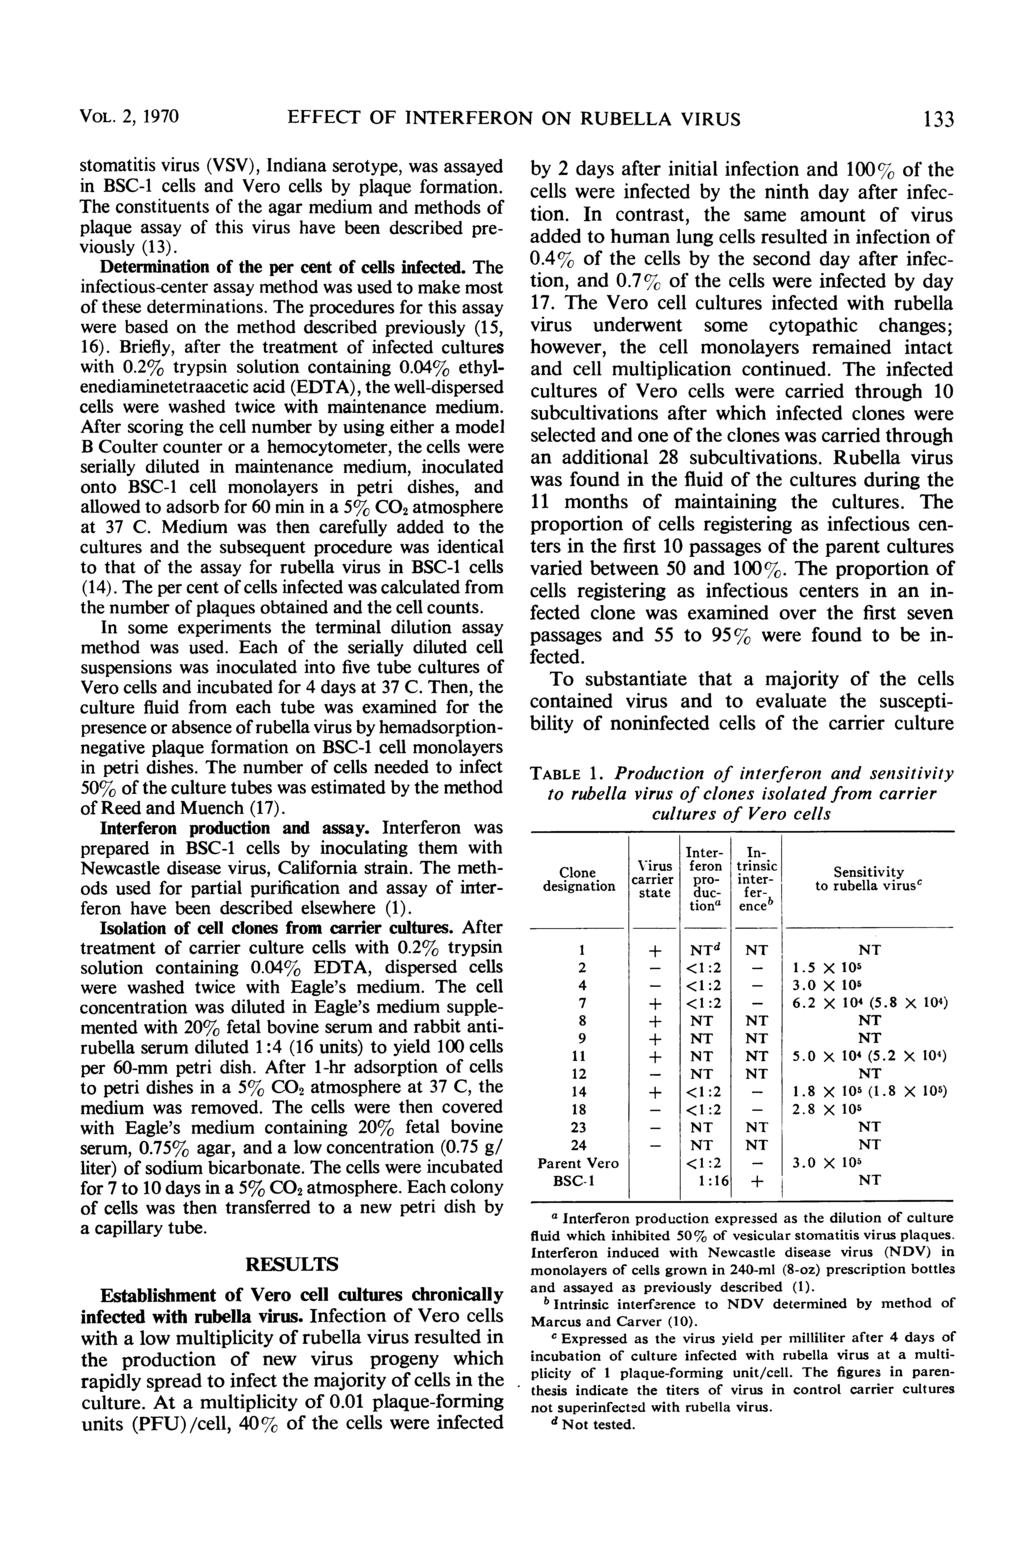 VOL. 2, 1970 EFFECT OF IERFERON ON RUBELLA VIRUS 133 stomatitis virus (VSV), Indiana serotype, was assayed in BSC-1 cells and Vero cells by plaque formation.